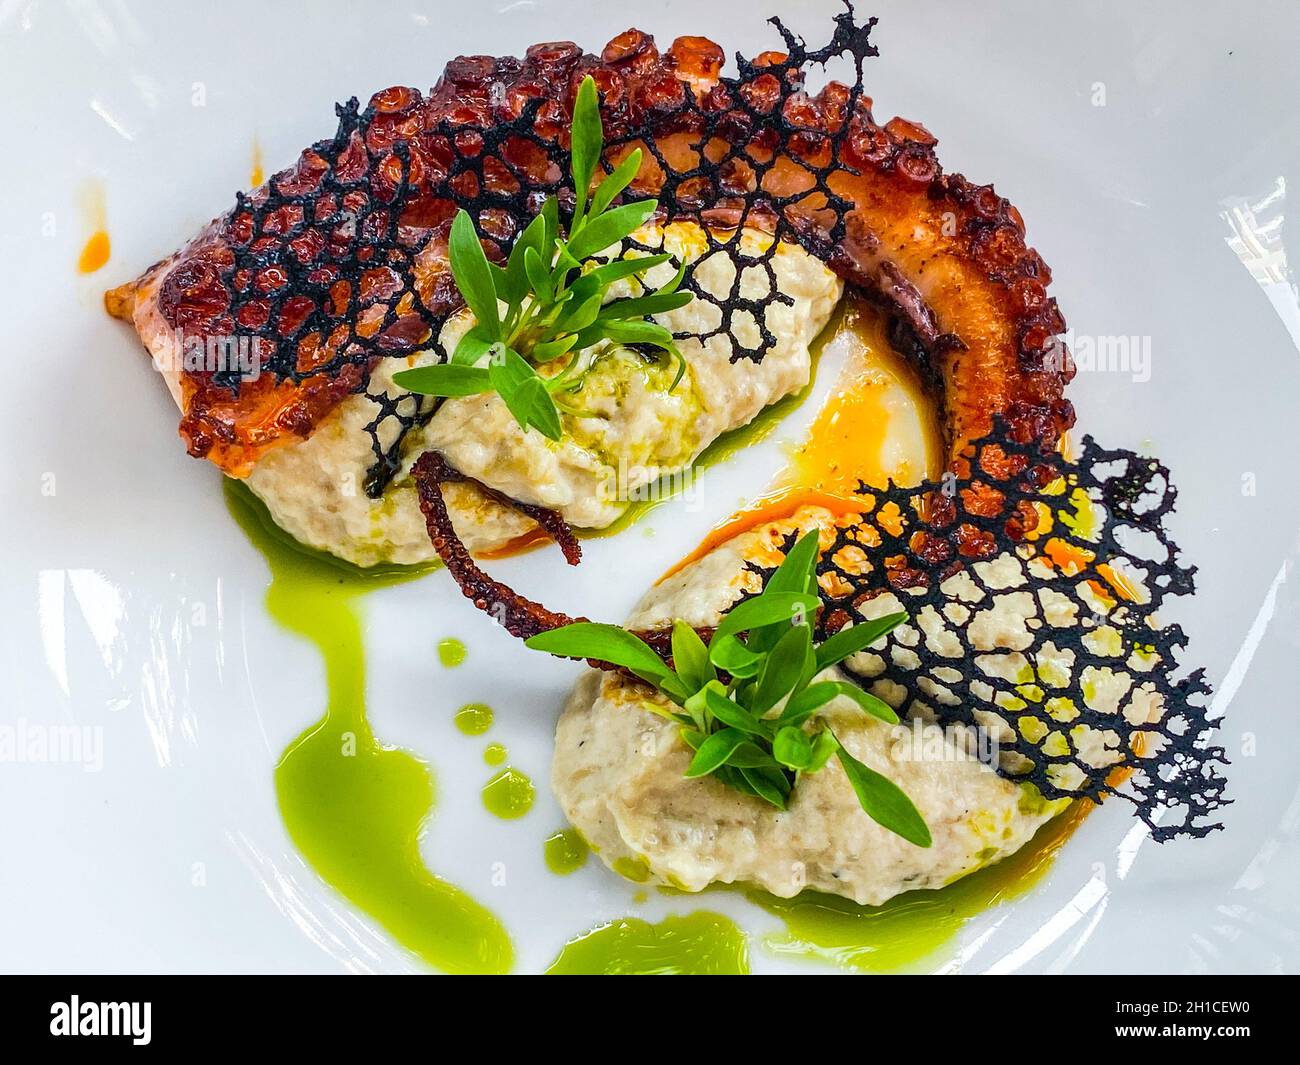 Grilled octopus with mash and cuttlefish ink lace in a plate at a restaurant Stock Photo